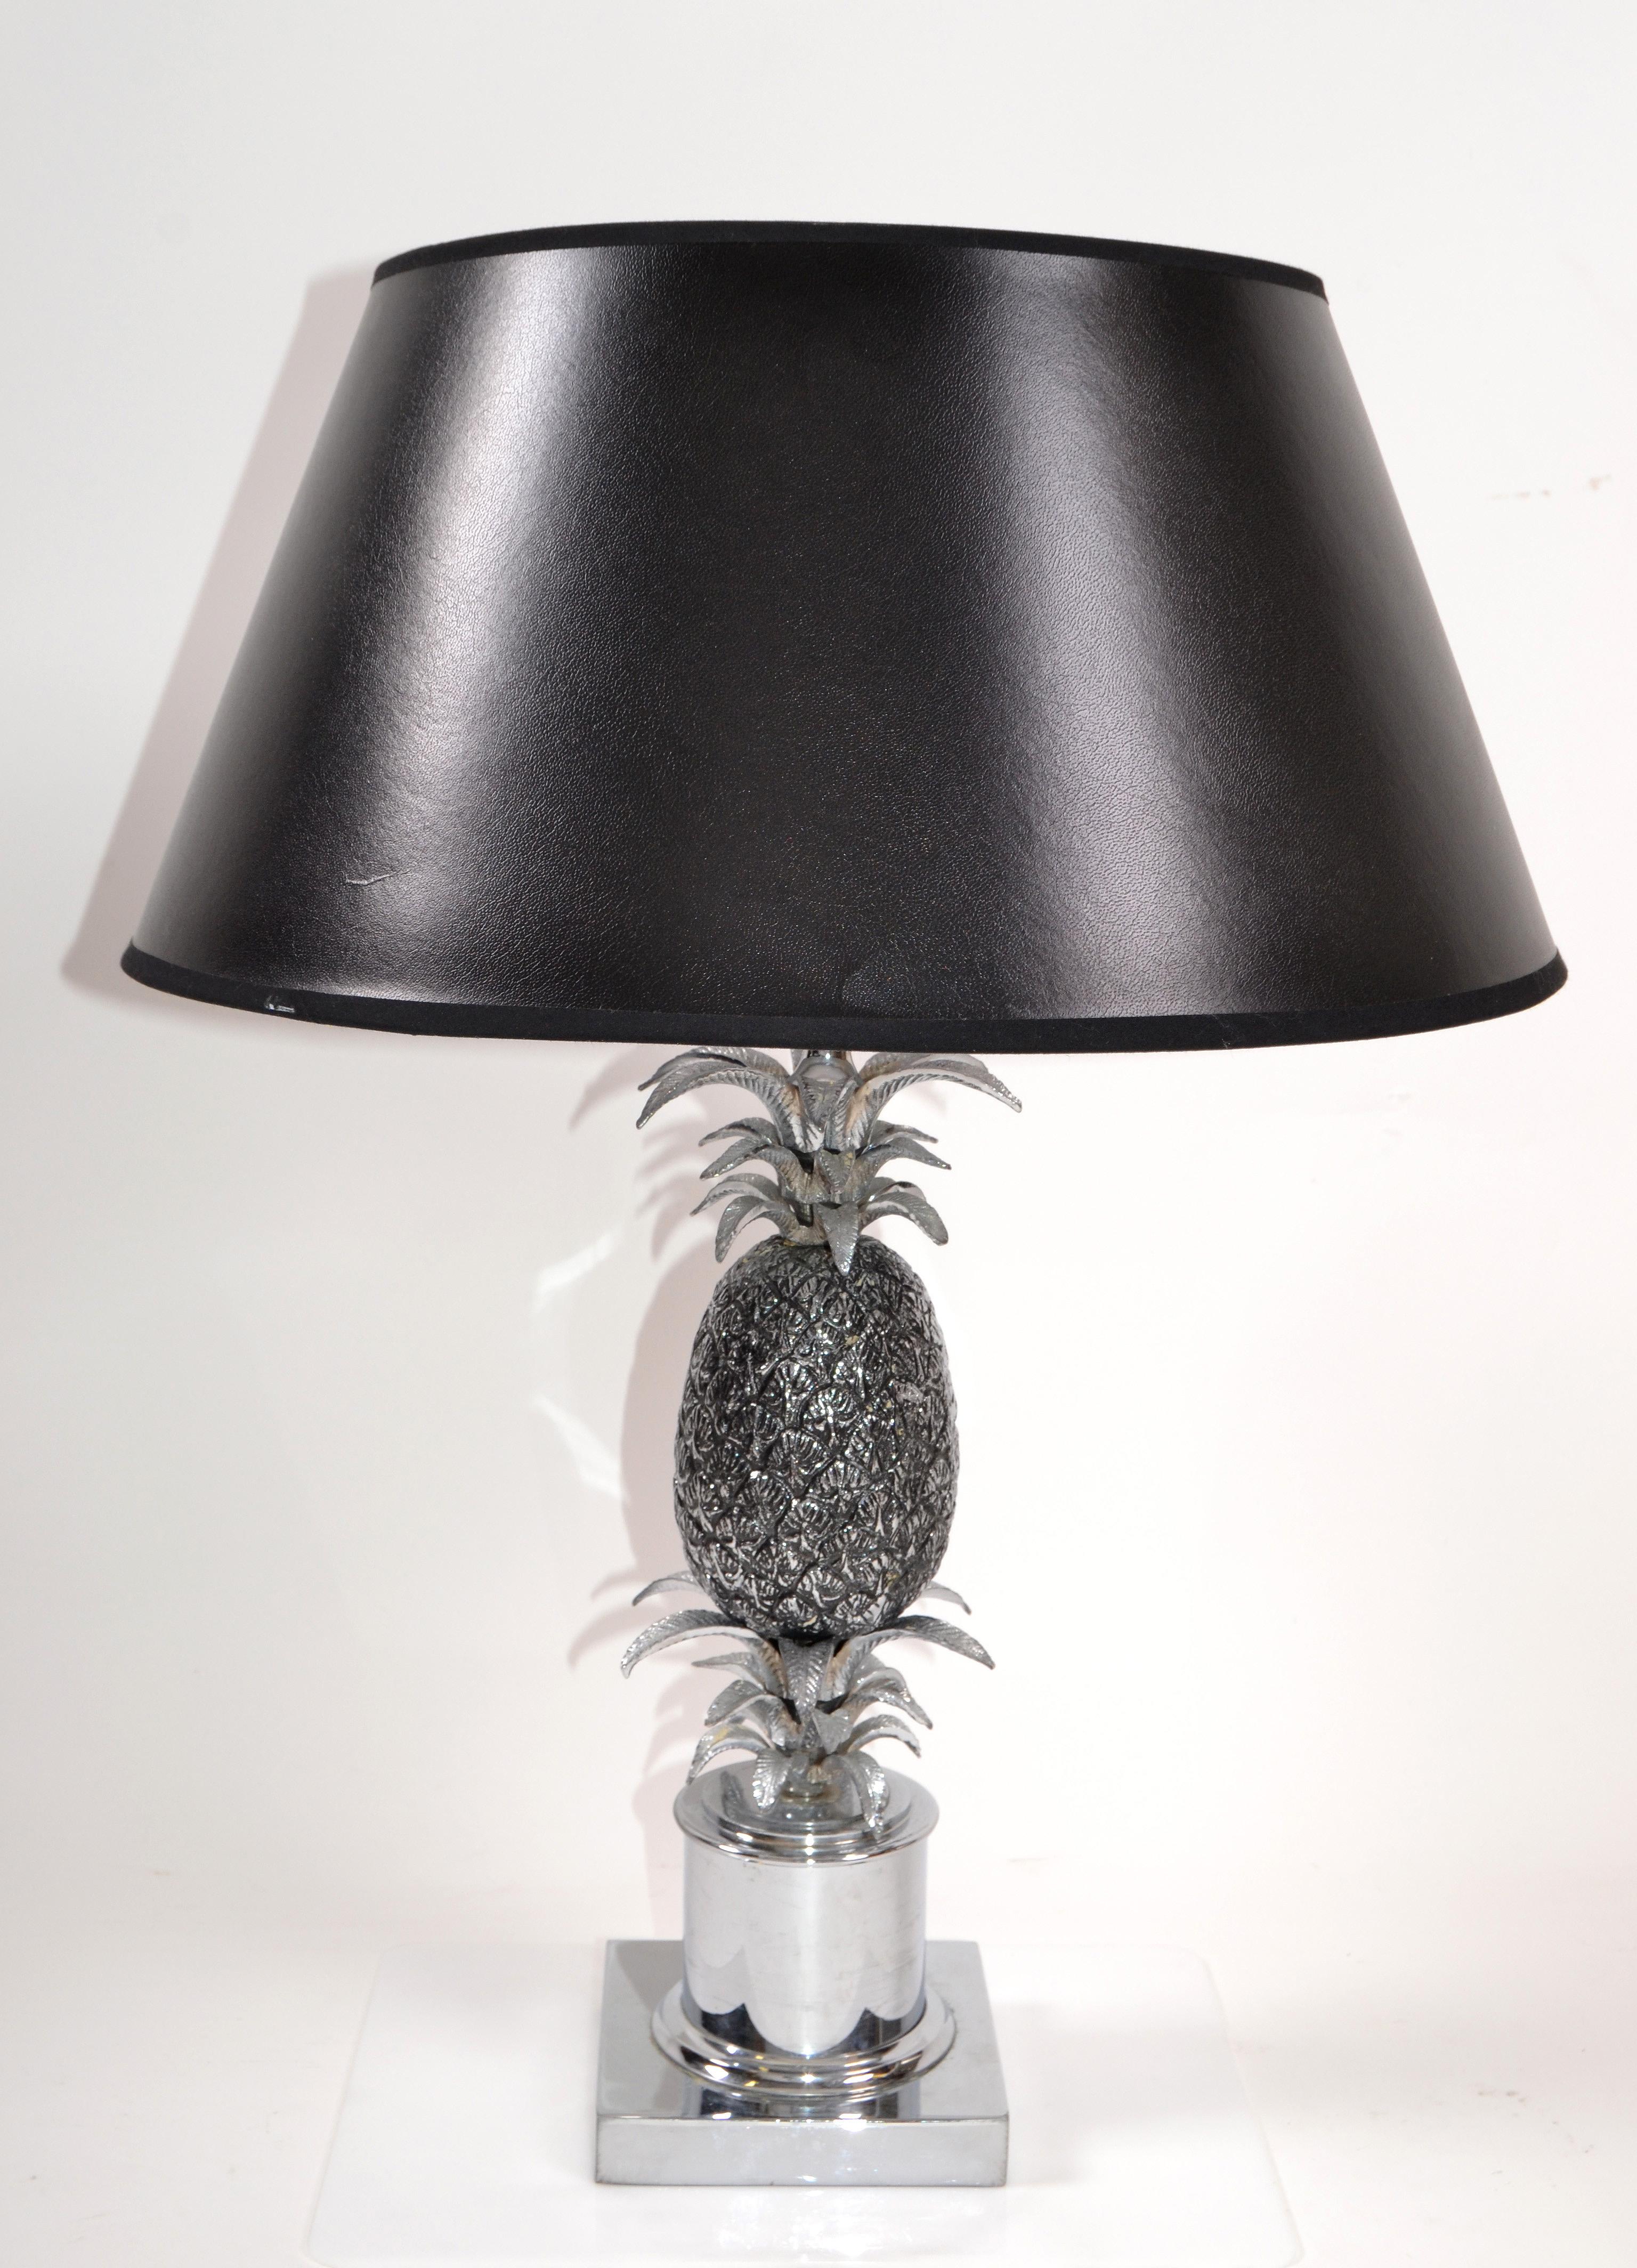 Maison Charles chrome and nickel pineapple table lamp French Provincial 1960s.
Wired for the U.S. and uses a max. 75 watts light bulb.
 